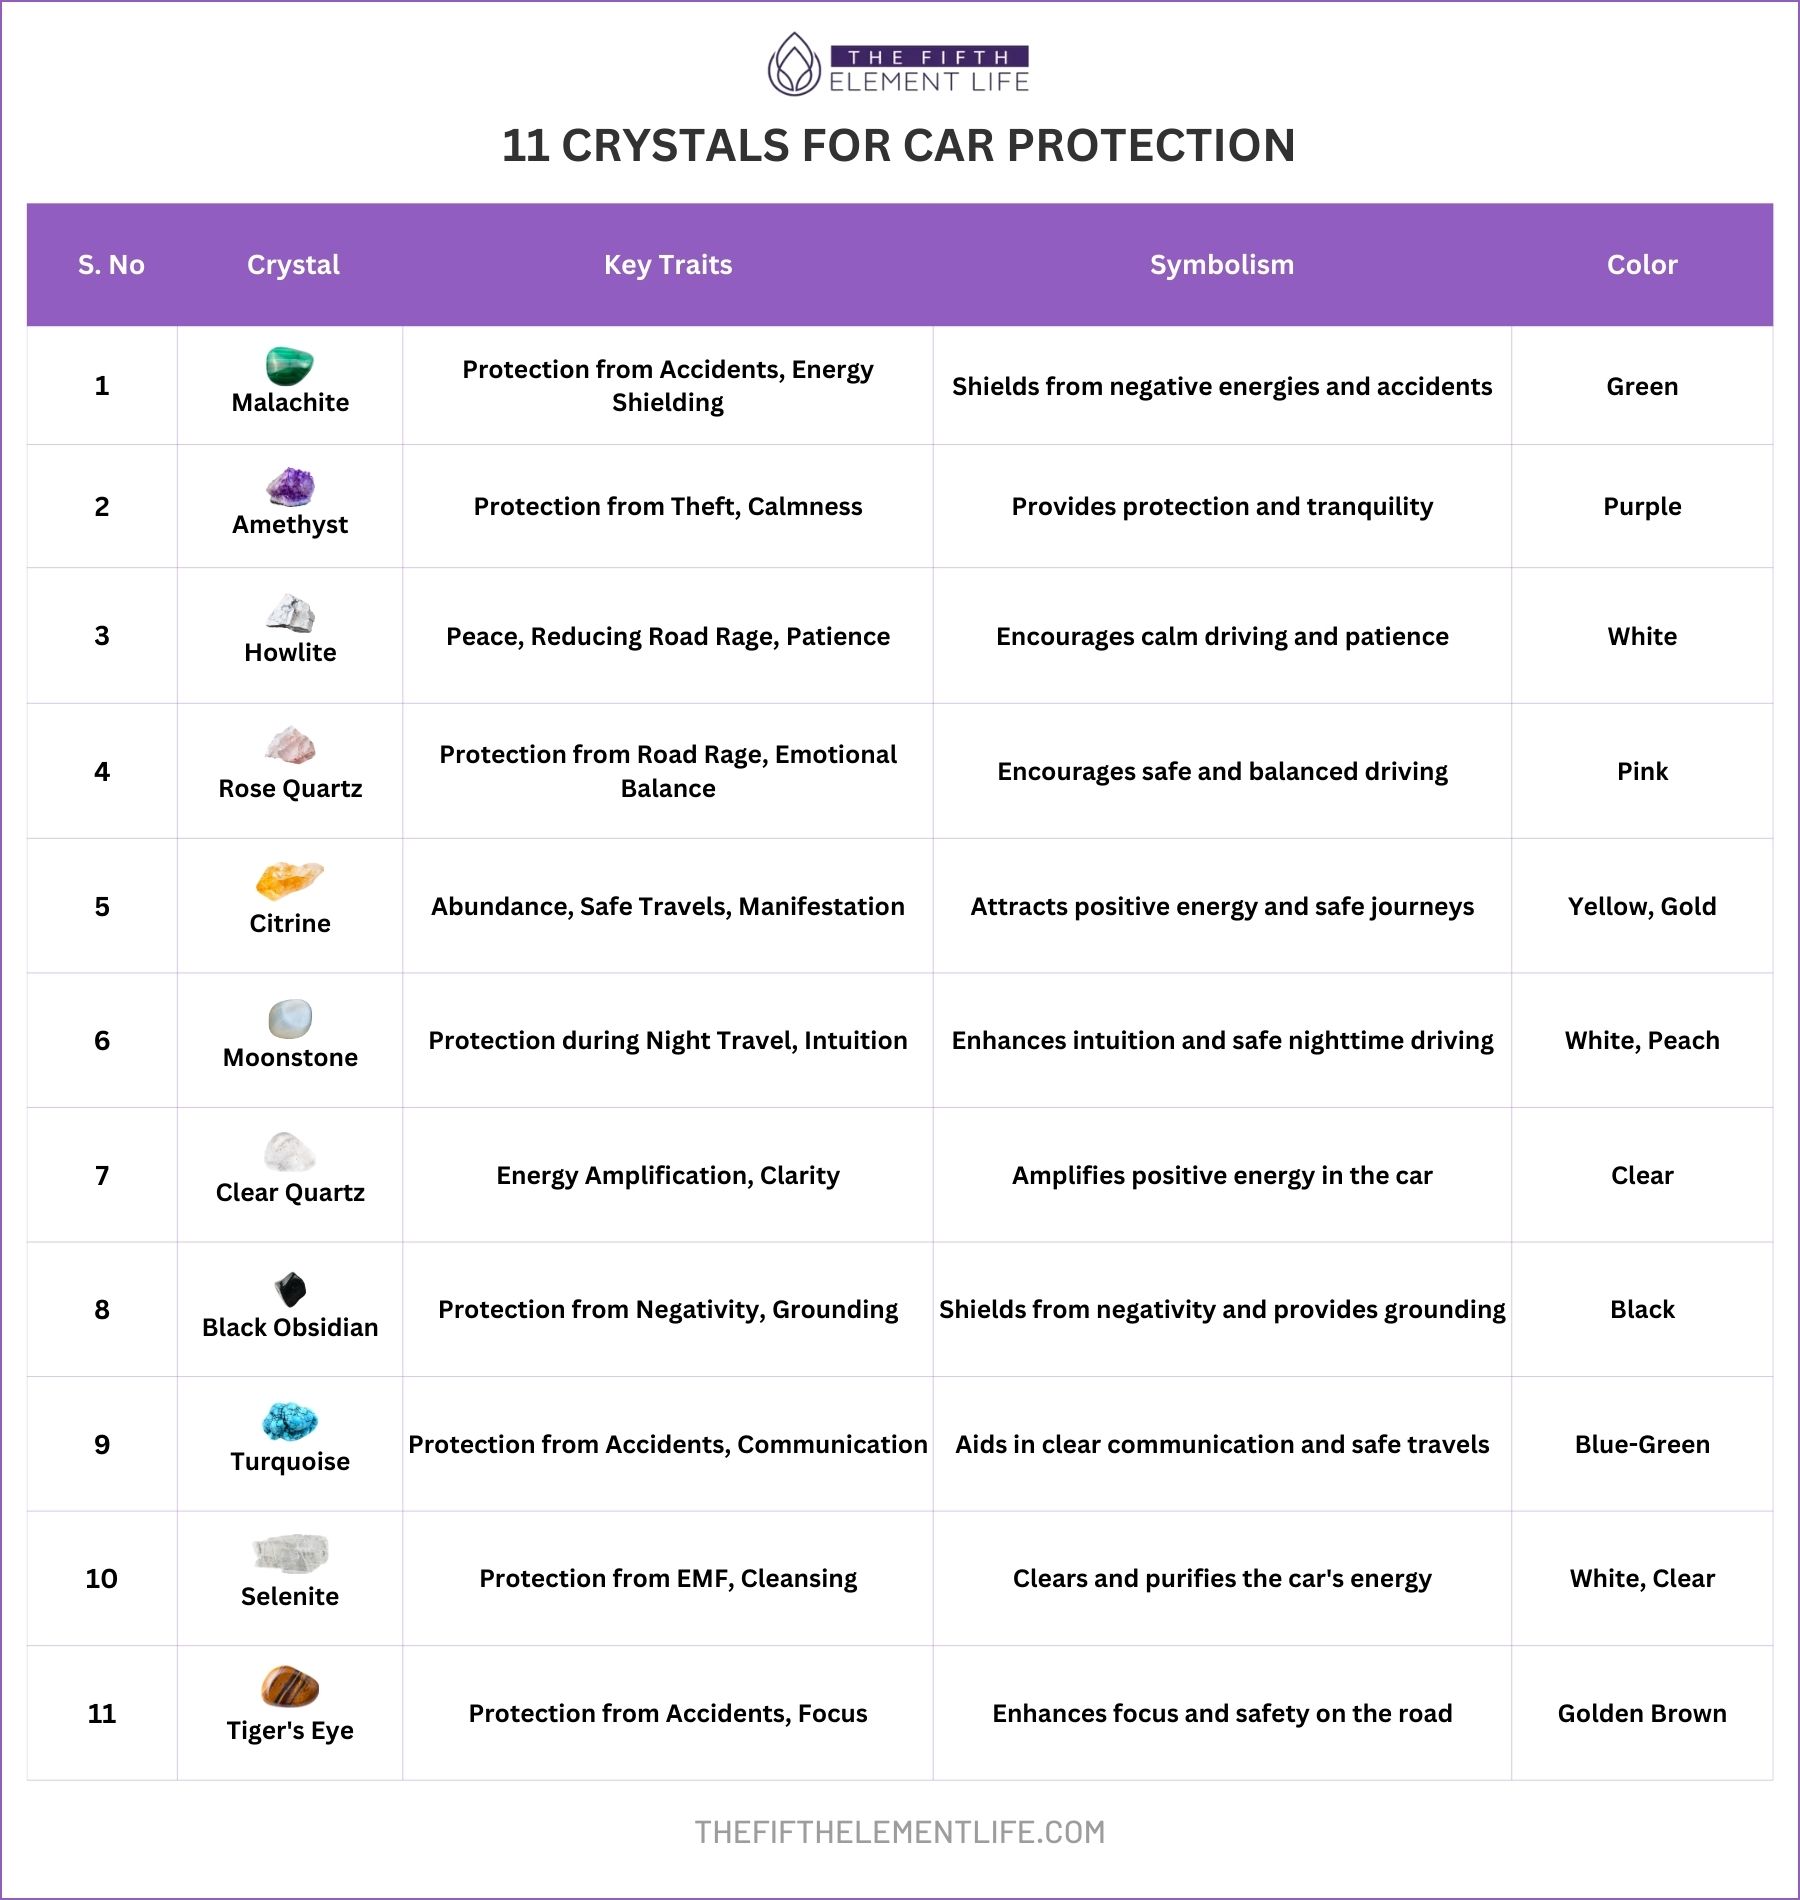 11 Crystals For Car Protection